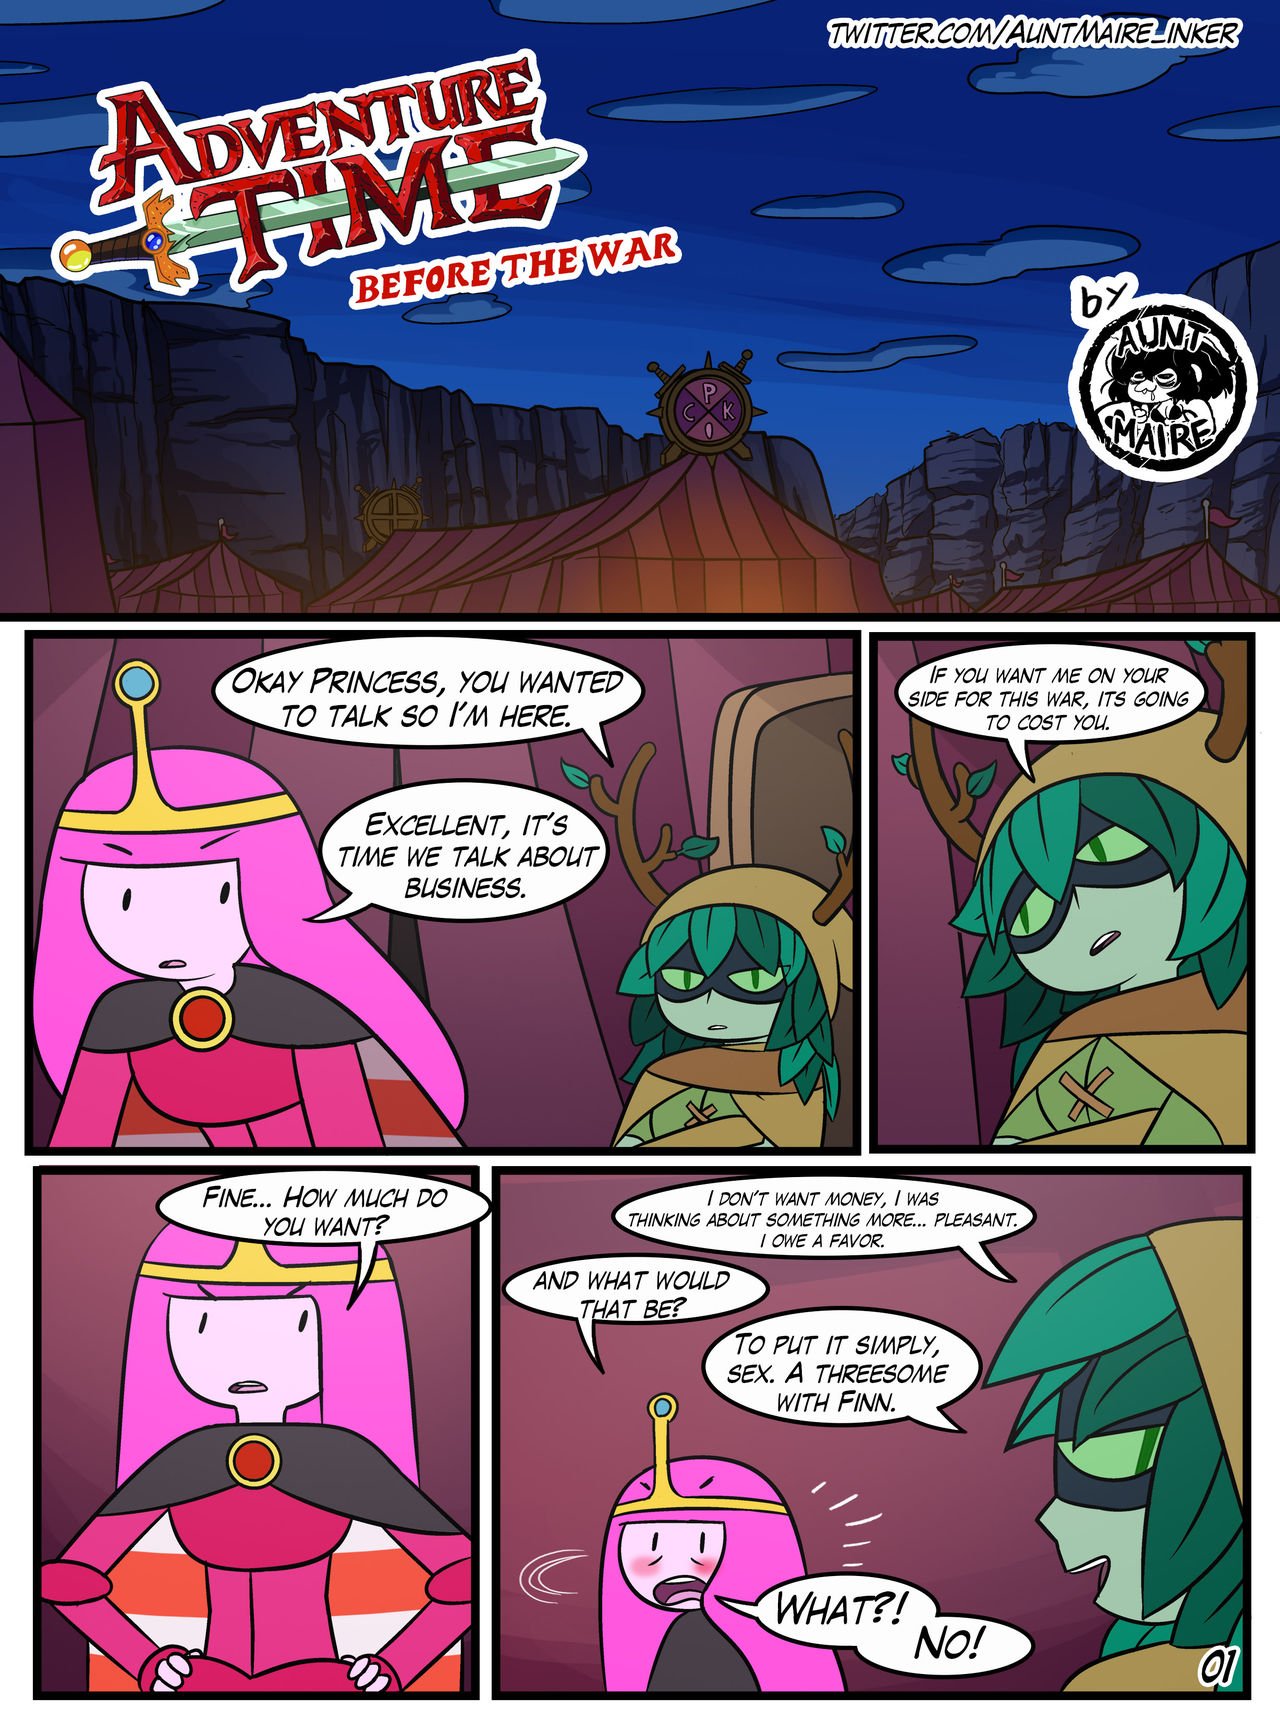 Adventure Time: Before the War - By Inkershike porn comic